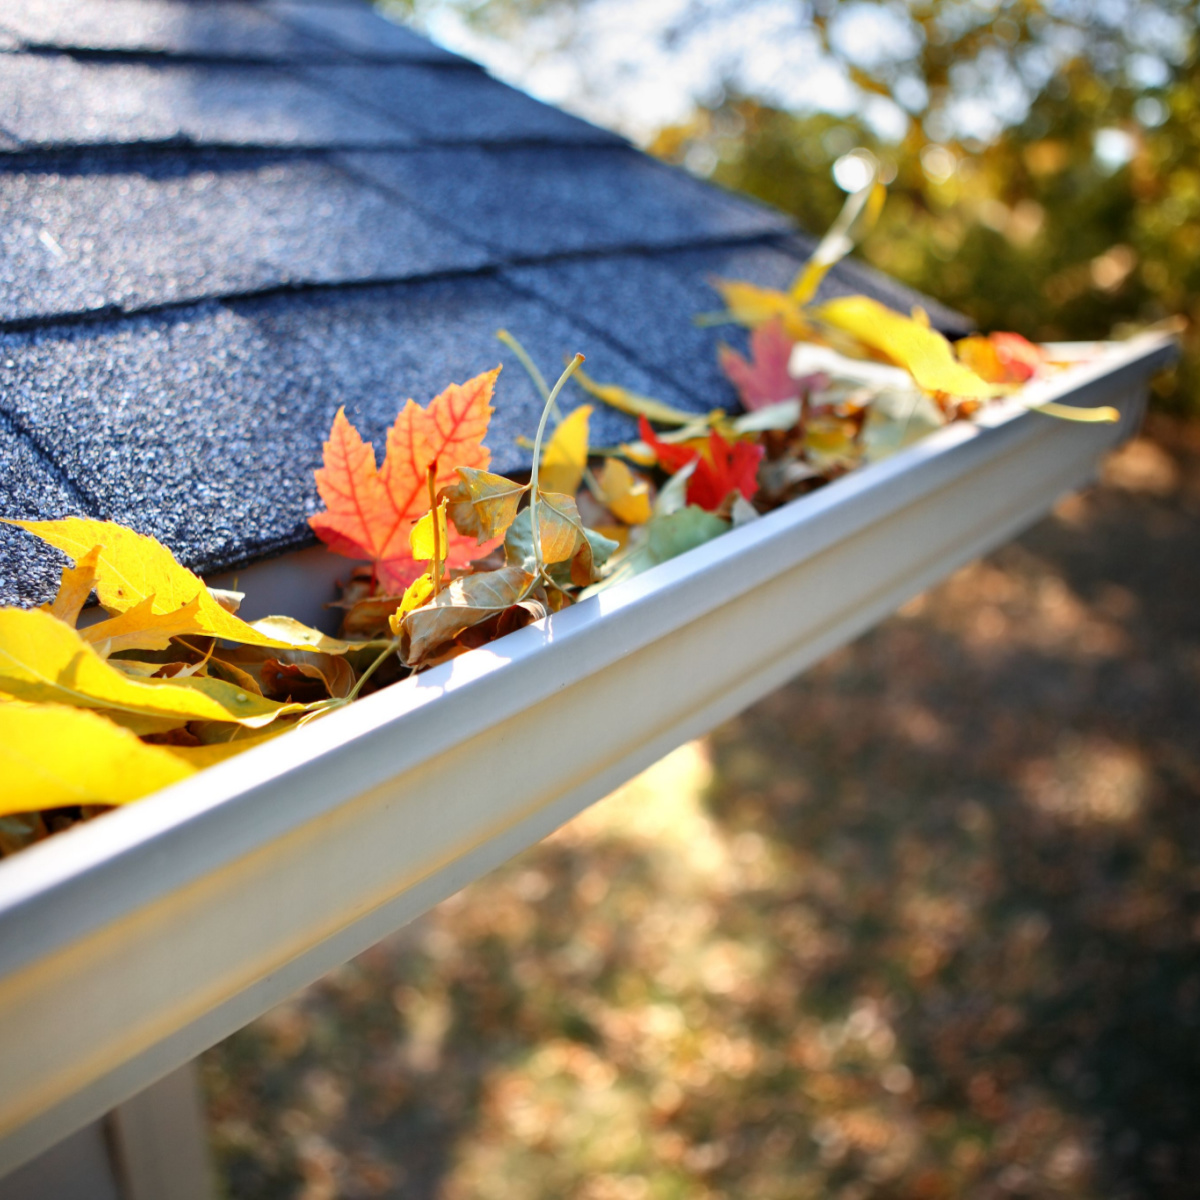 Pearland roof gutter system during fall season